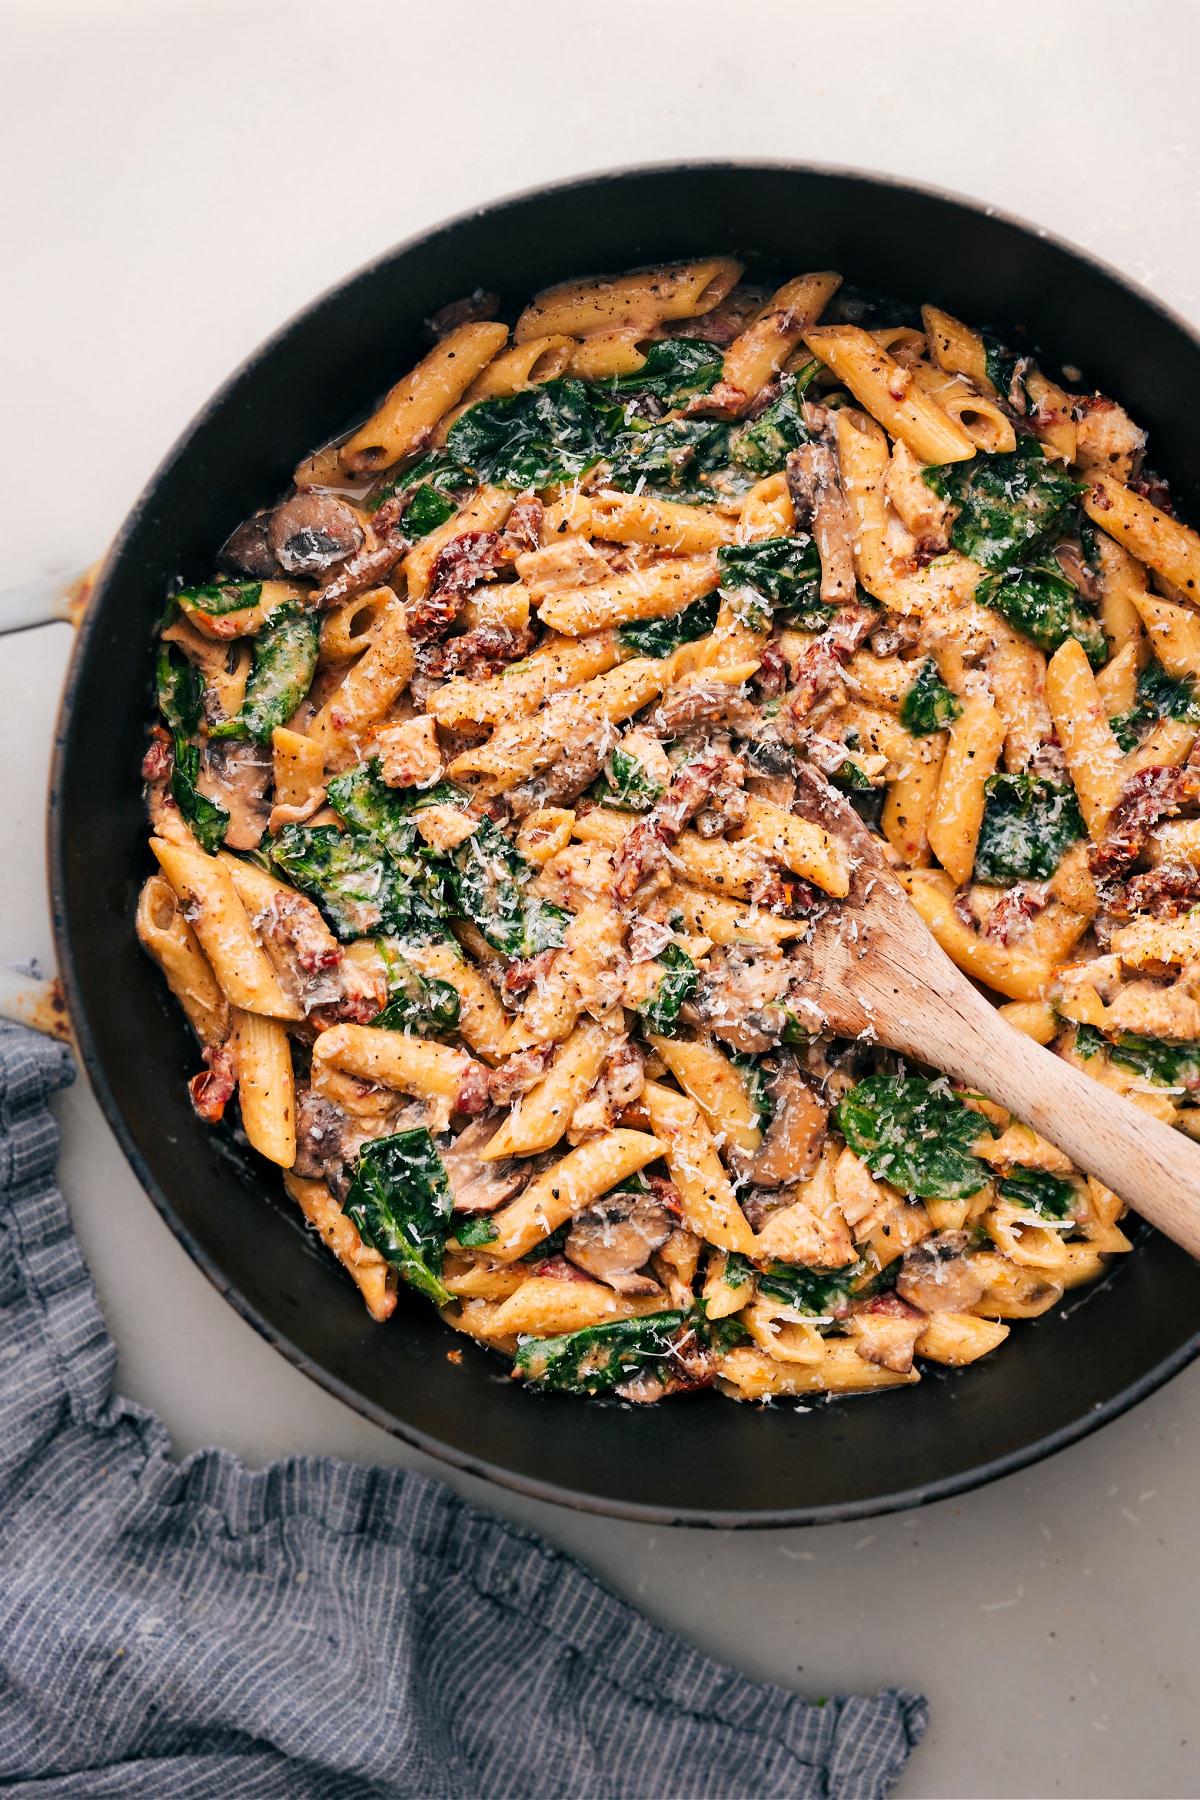 Spinach Penne Rigate no. 41